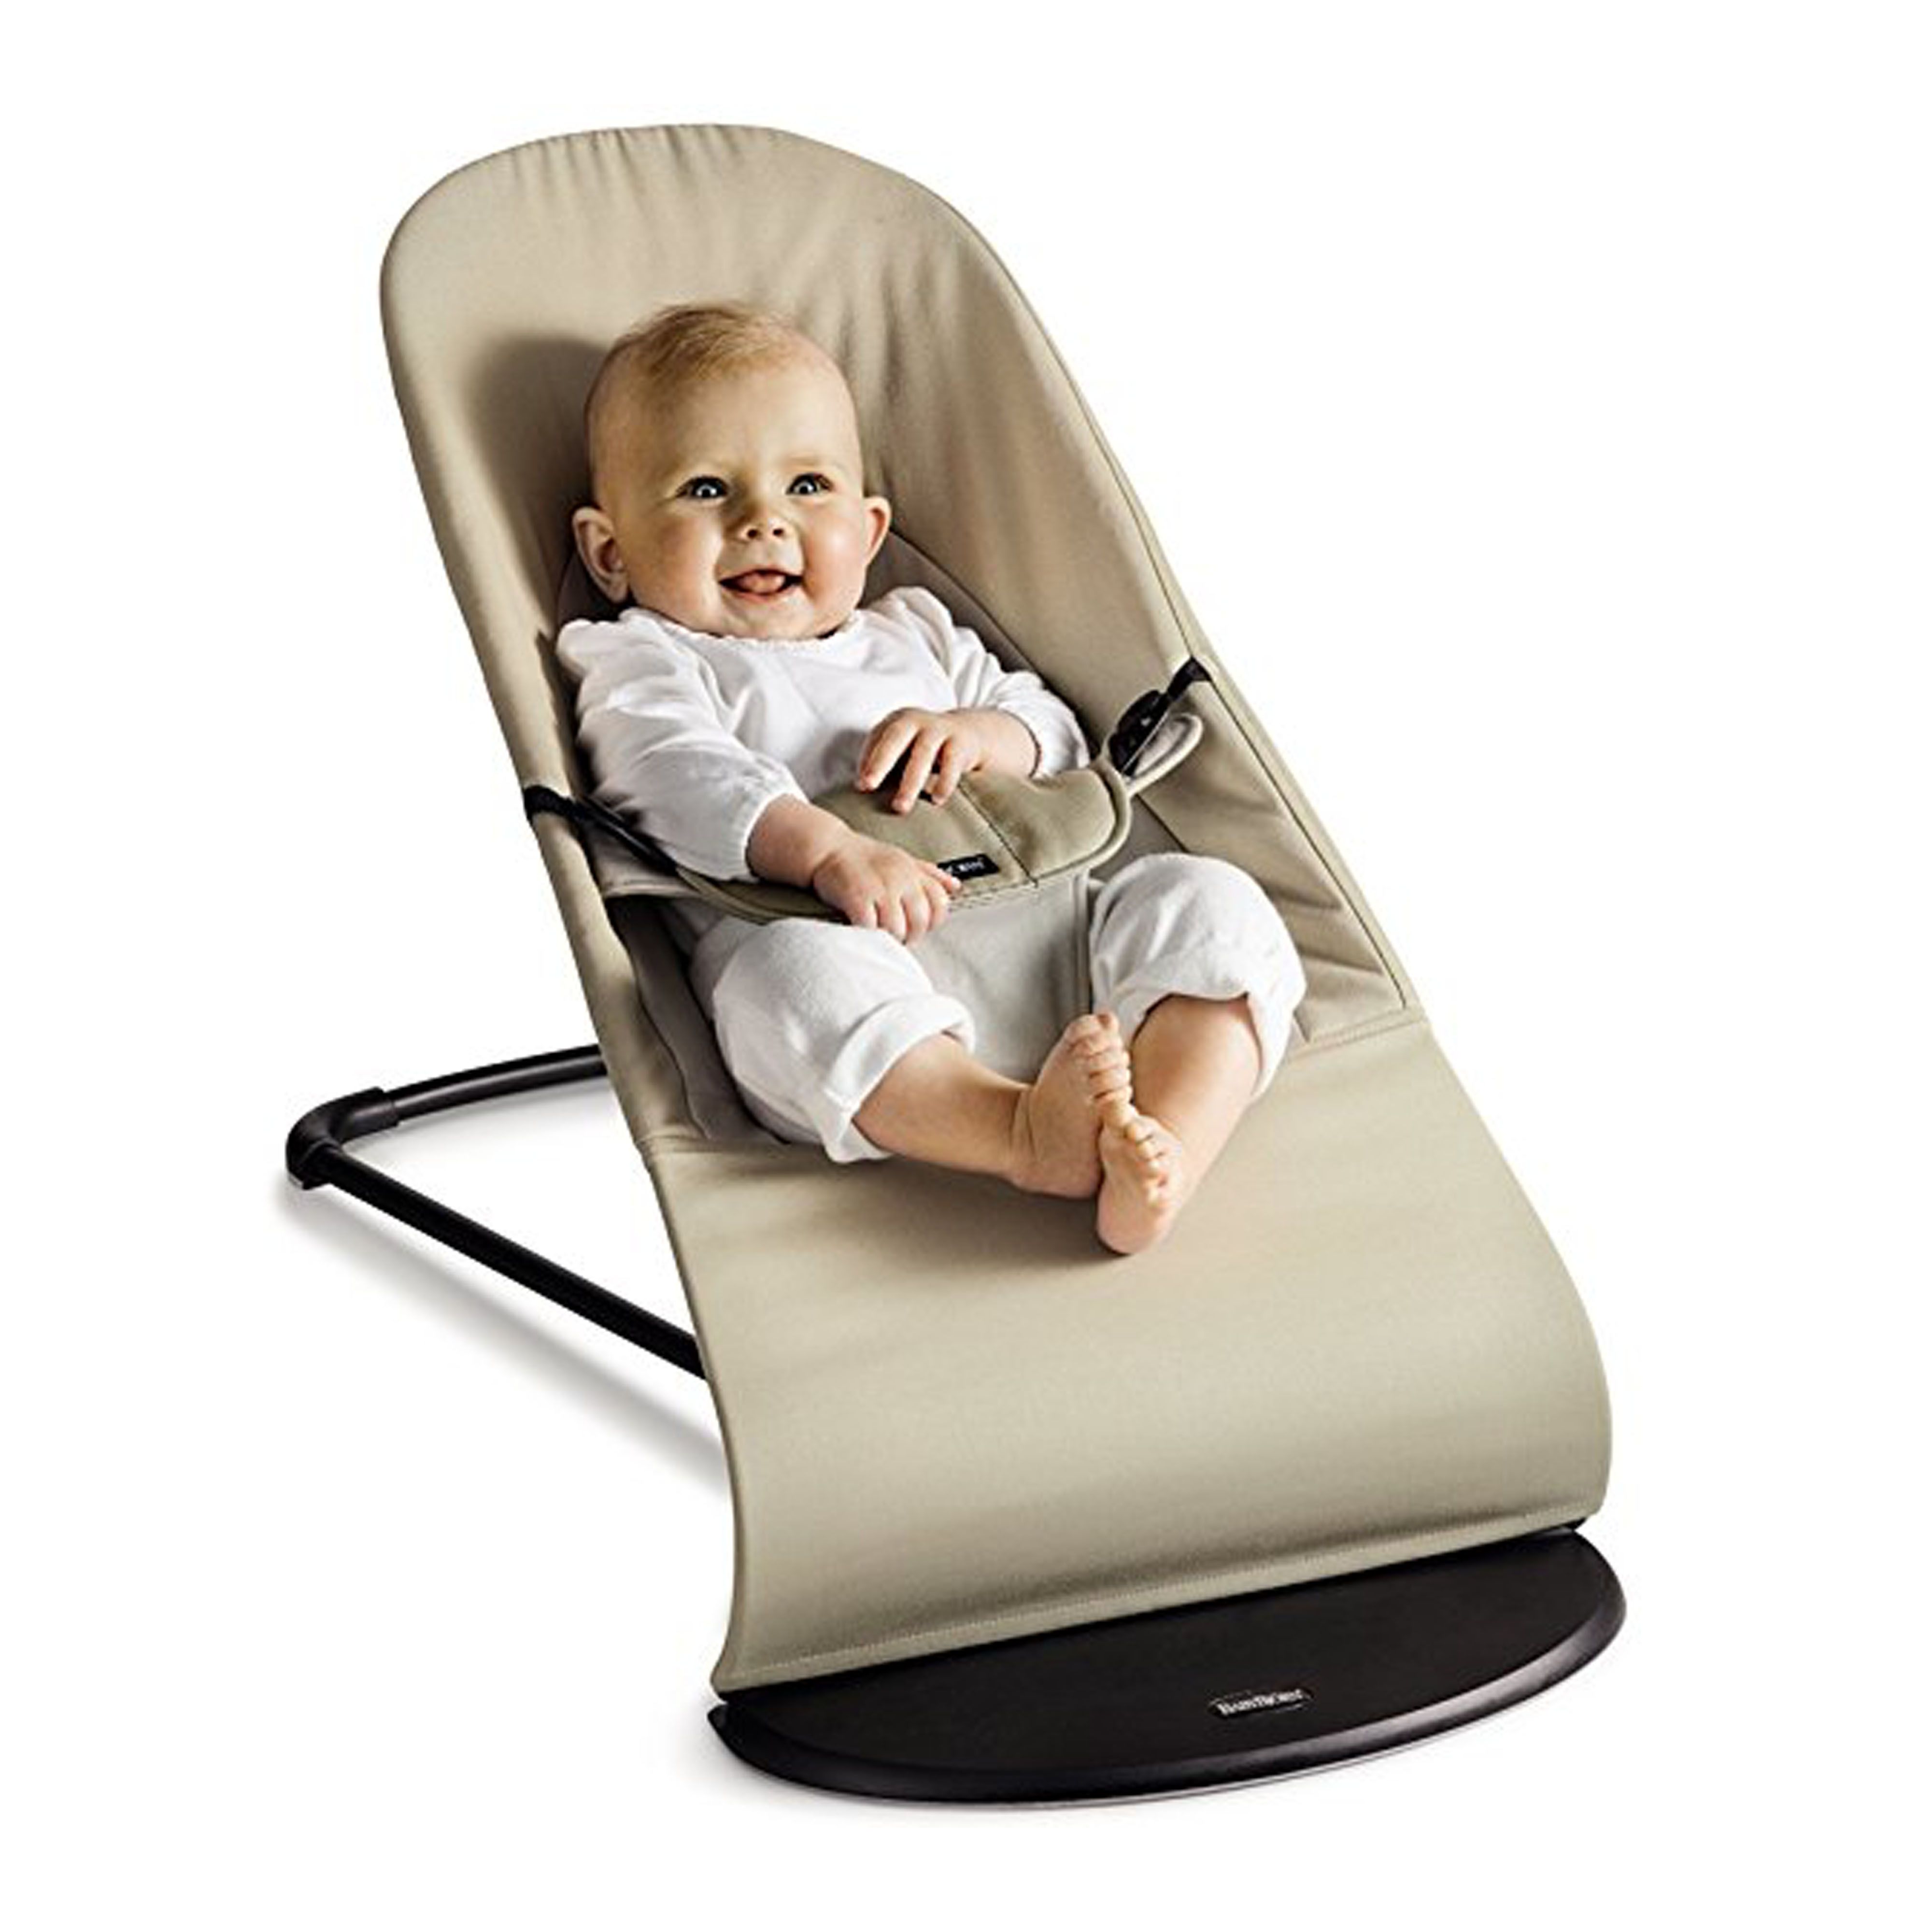 BabyBjorn Bouncer Balance Soft Review, Price and Features - Pros and Cons  of Baby Bjorn Bouncer Balance Soft